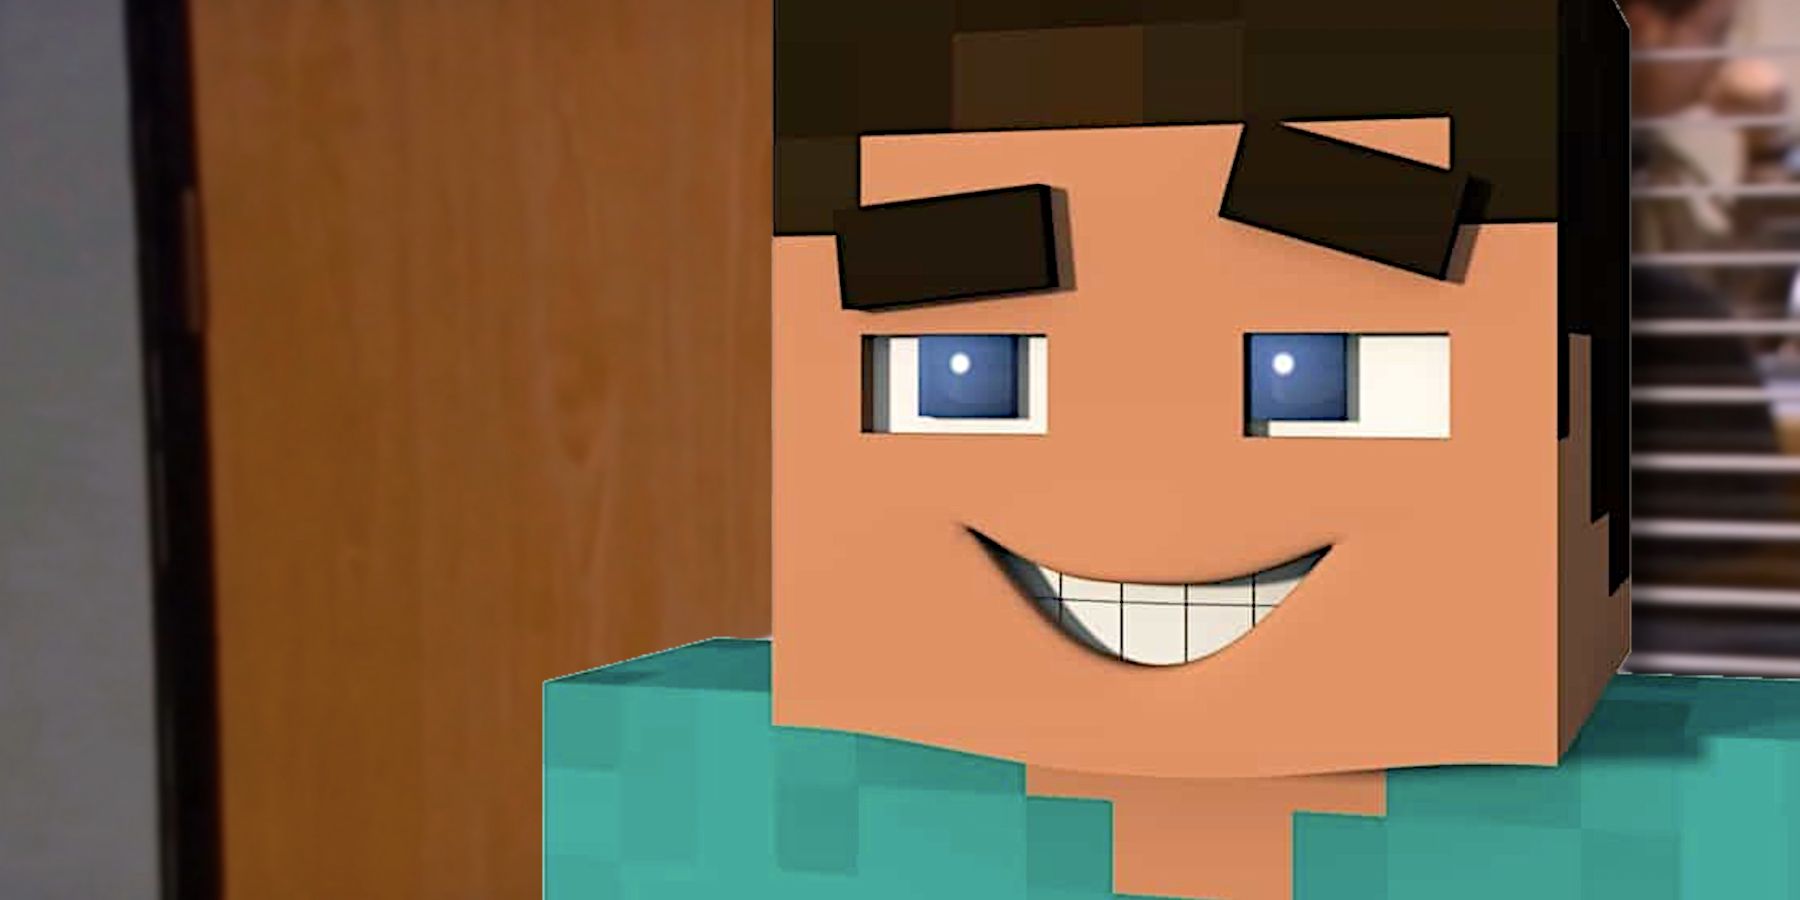 An image of Minecraft Steve in a setting similar to The Office.